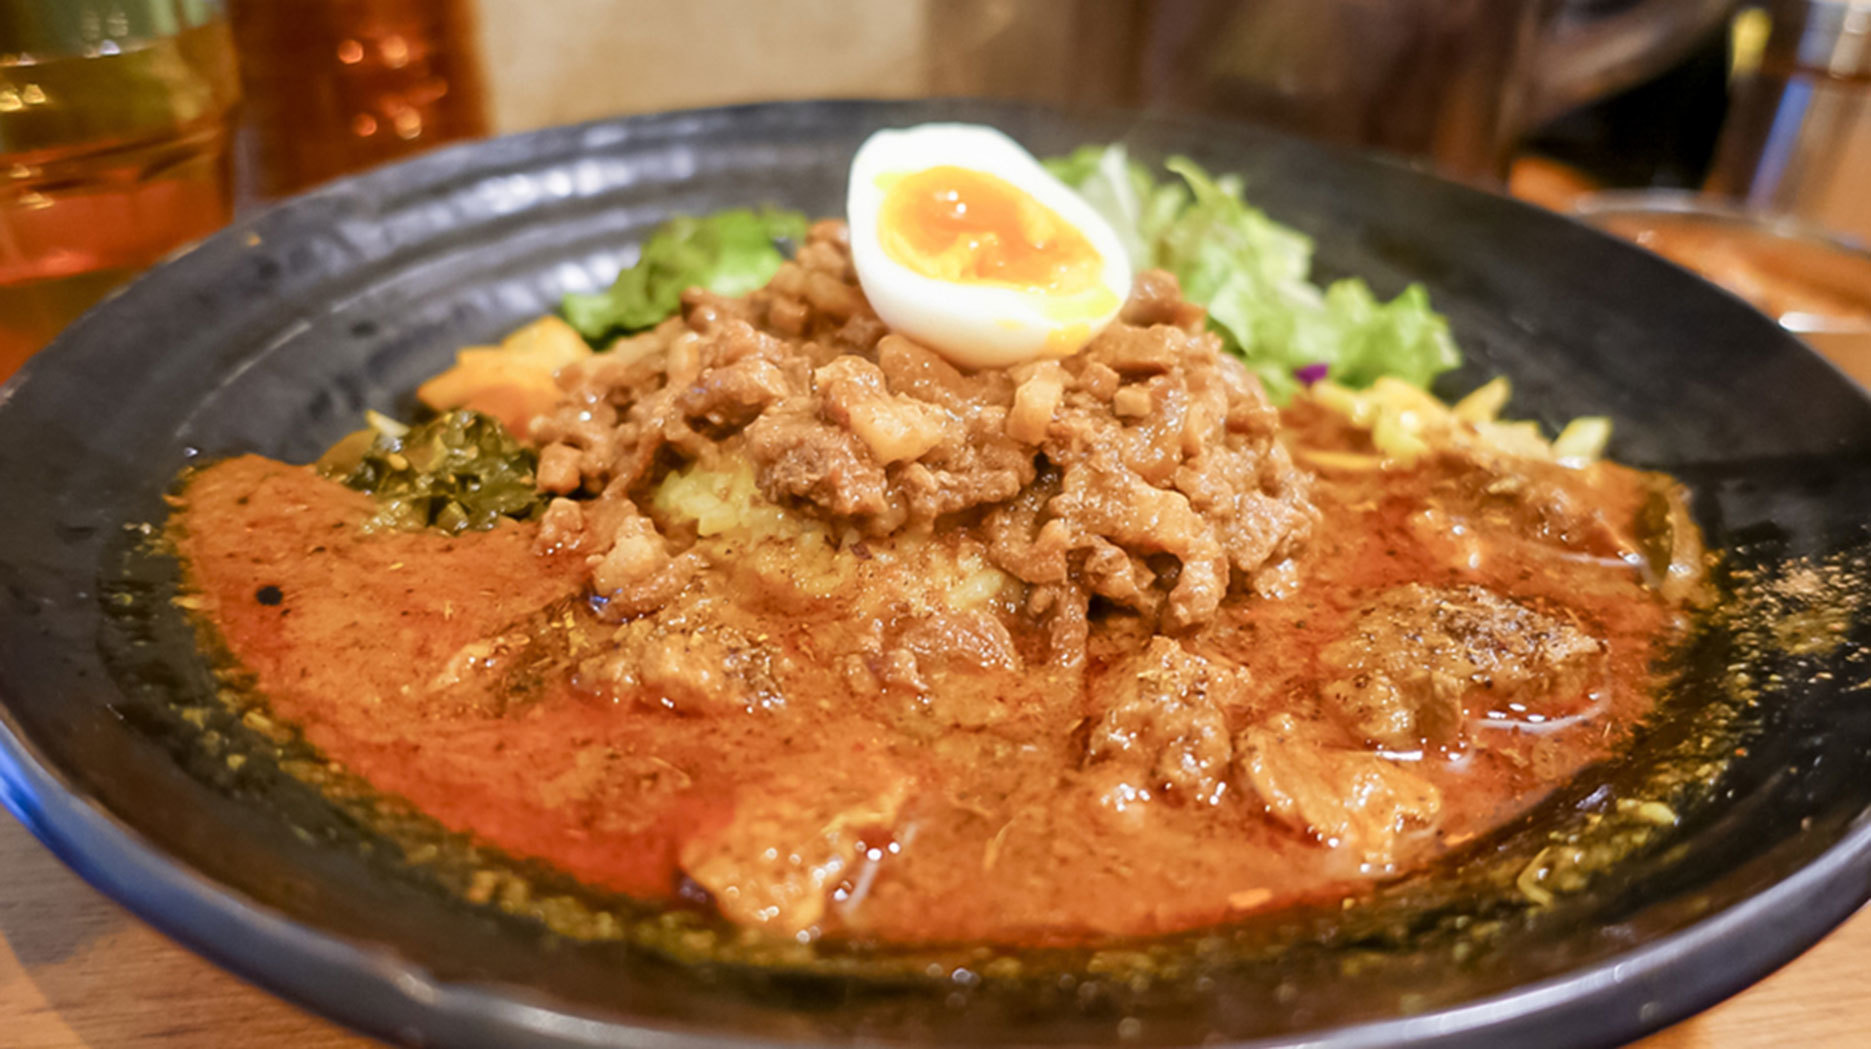 abtabetaiさんが投稿したSPICY CURRY 魯珈（東京/大久保）の口コミ詳細